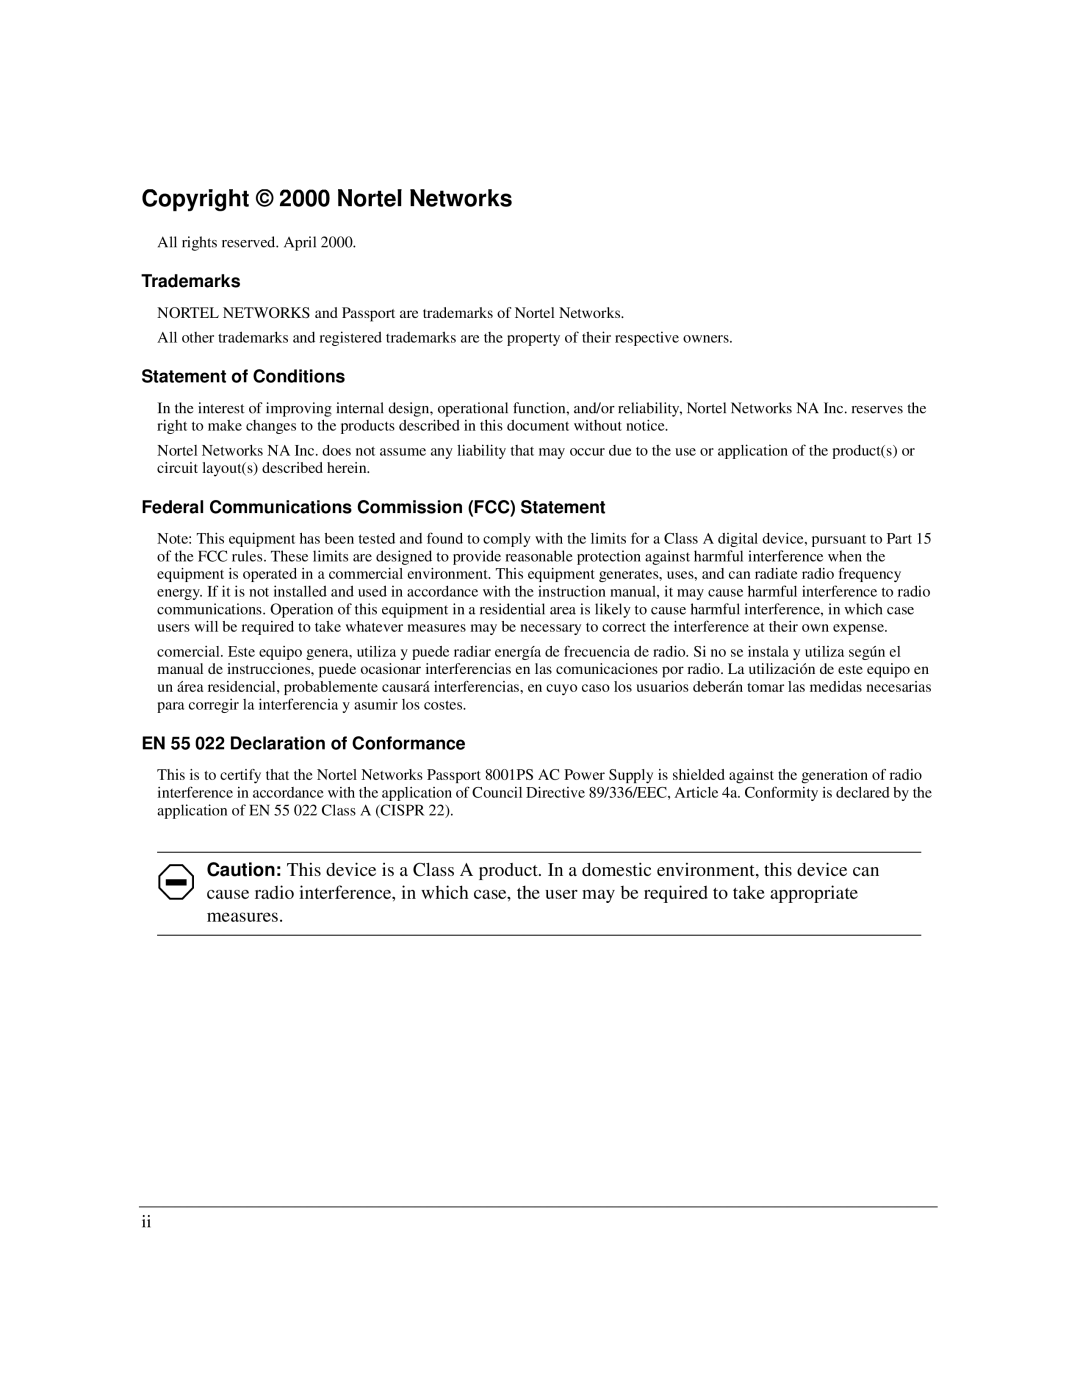 Nortel Networks 8001PS manual Copyright 2000 Nortel Networks, Trademarks, Statement of Conditions 